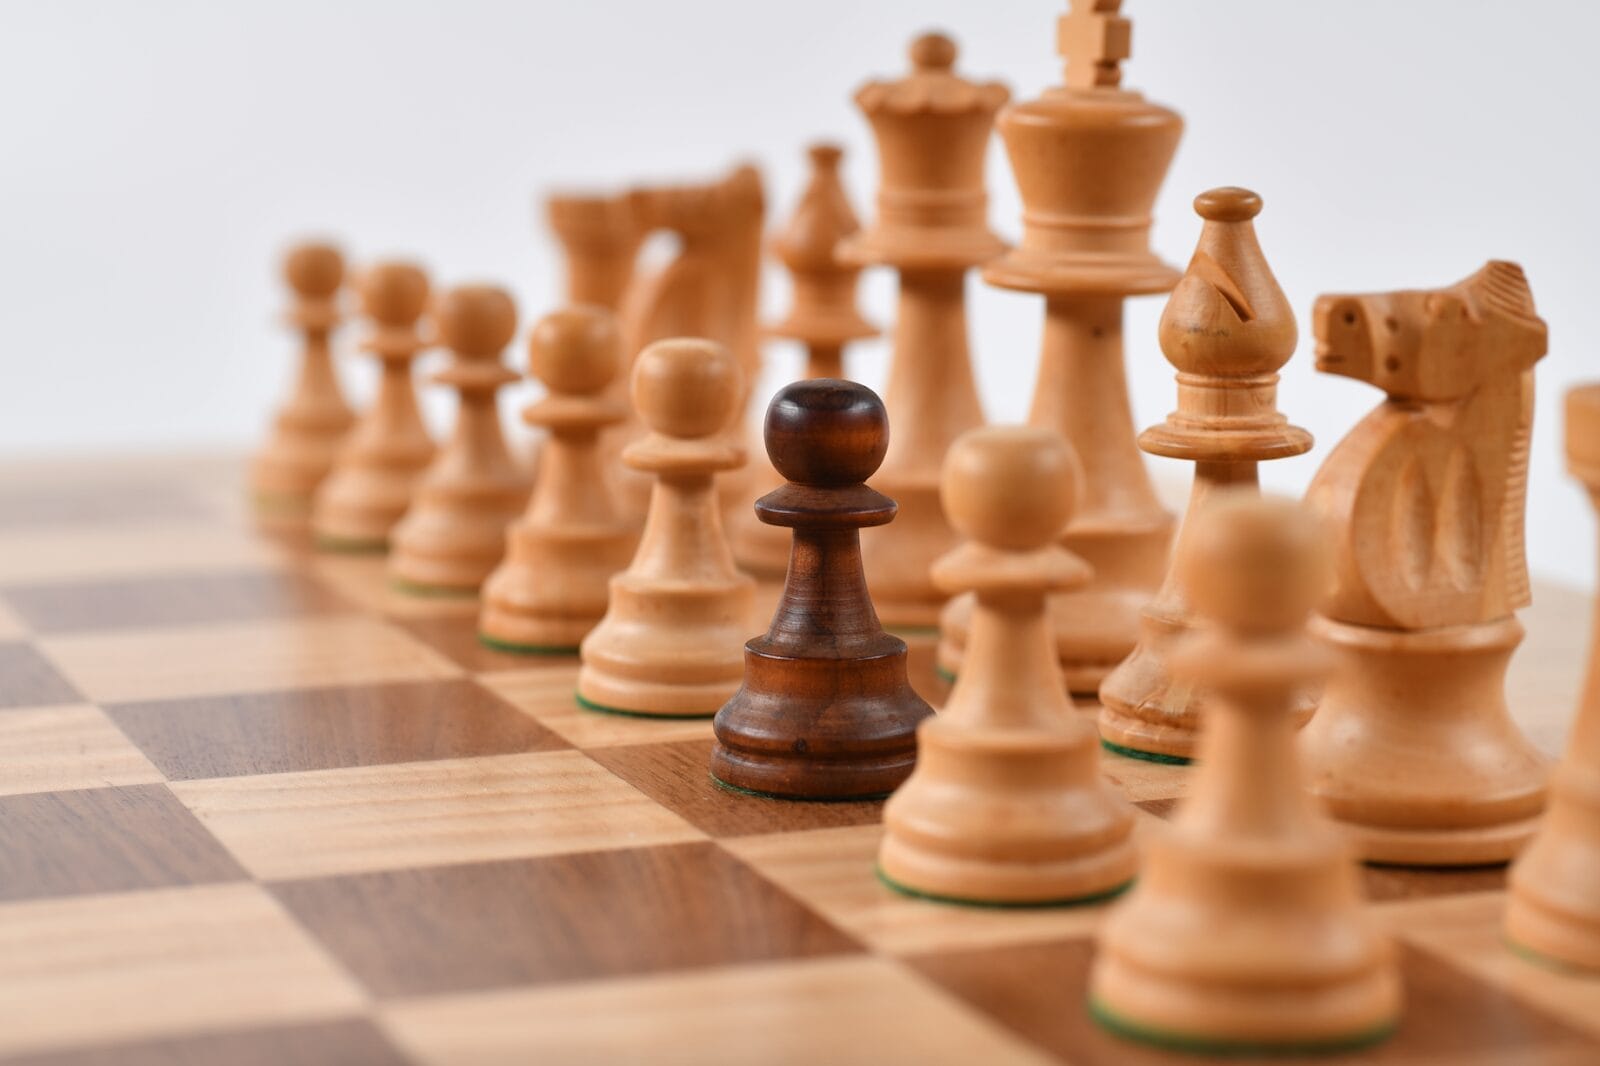 What's the easiest way to win chess in as few moves as possible? - Quora